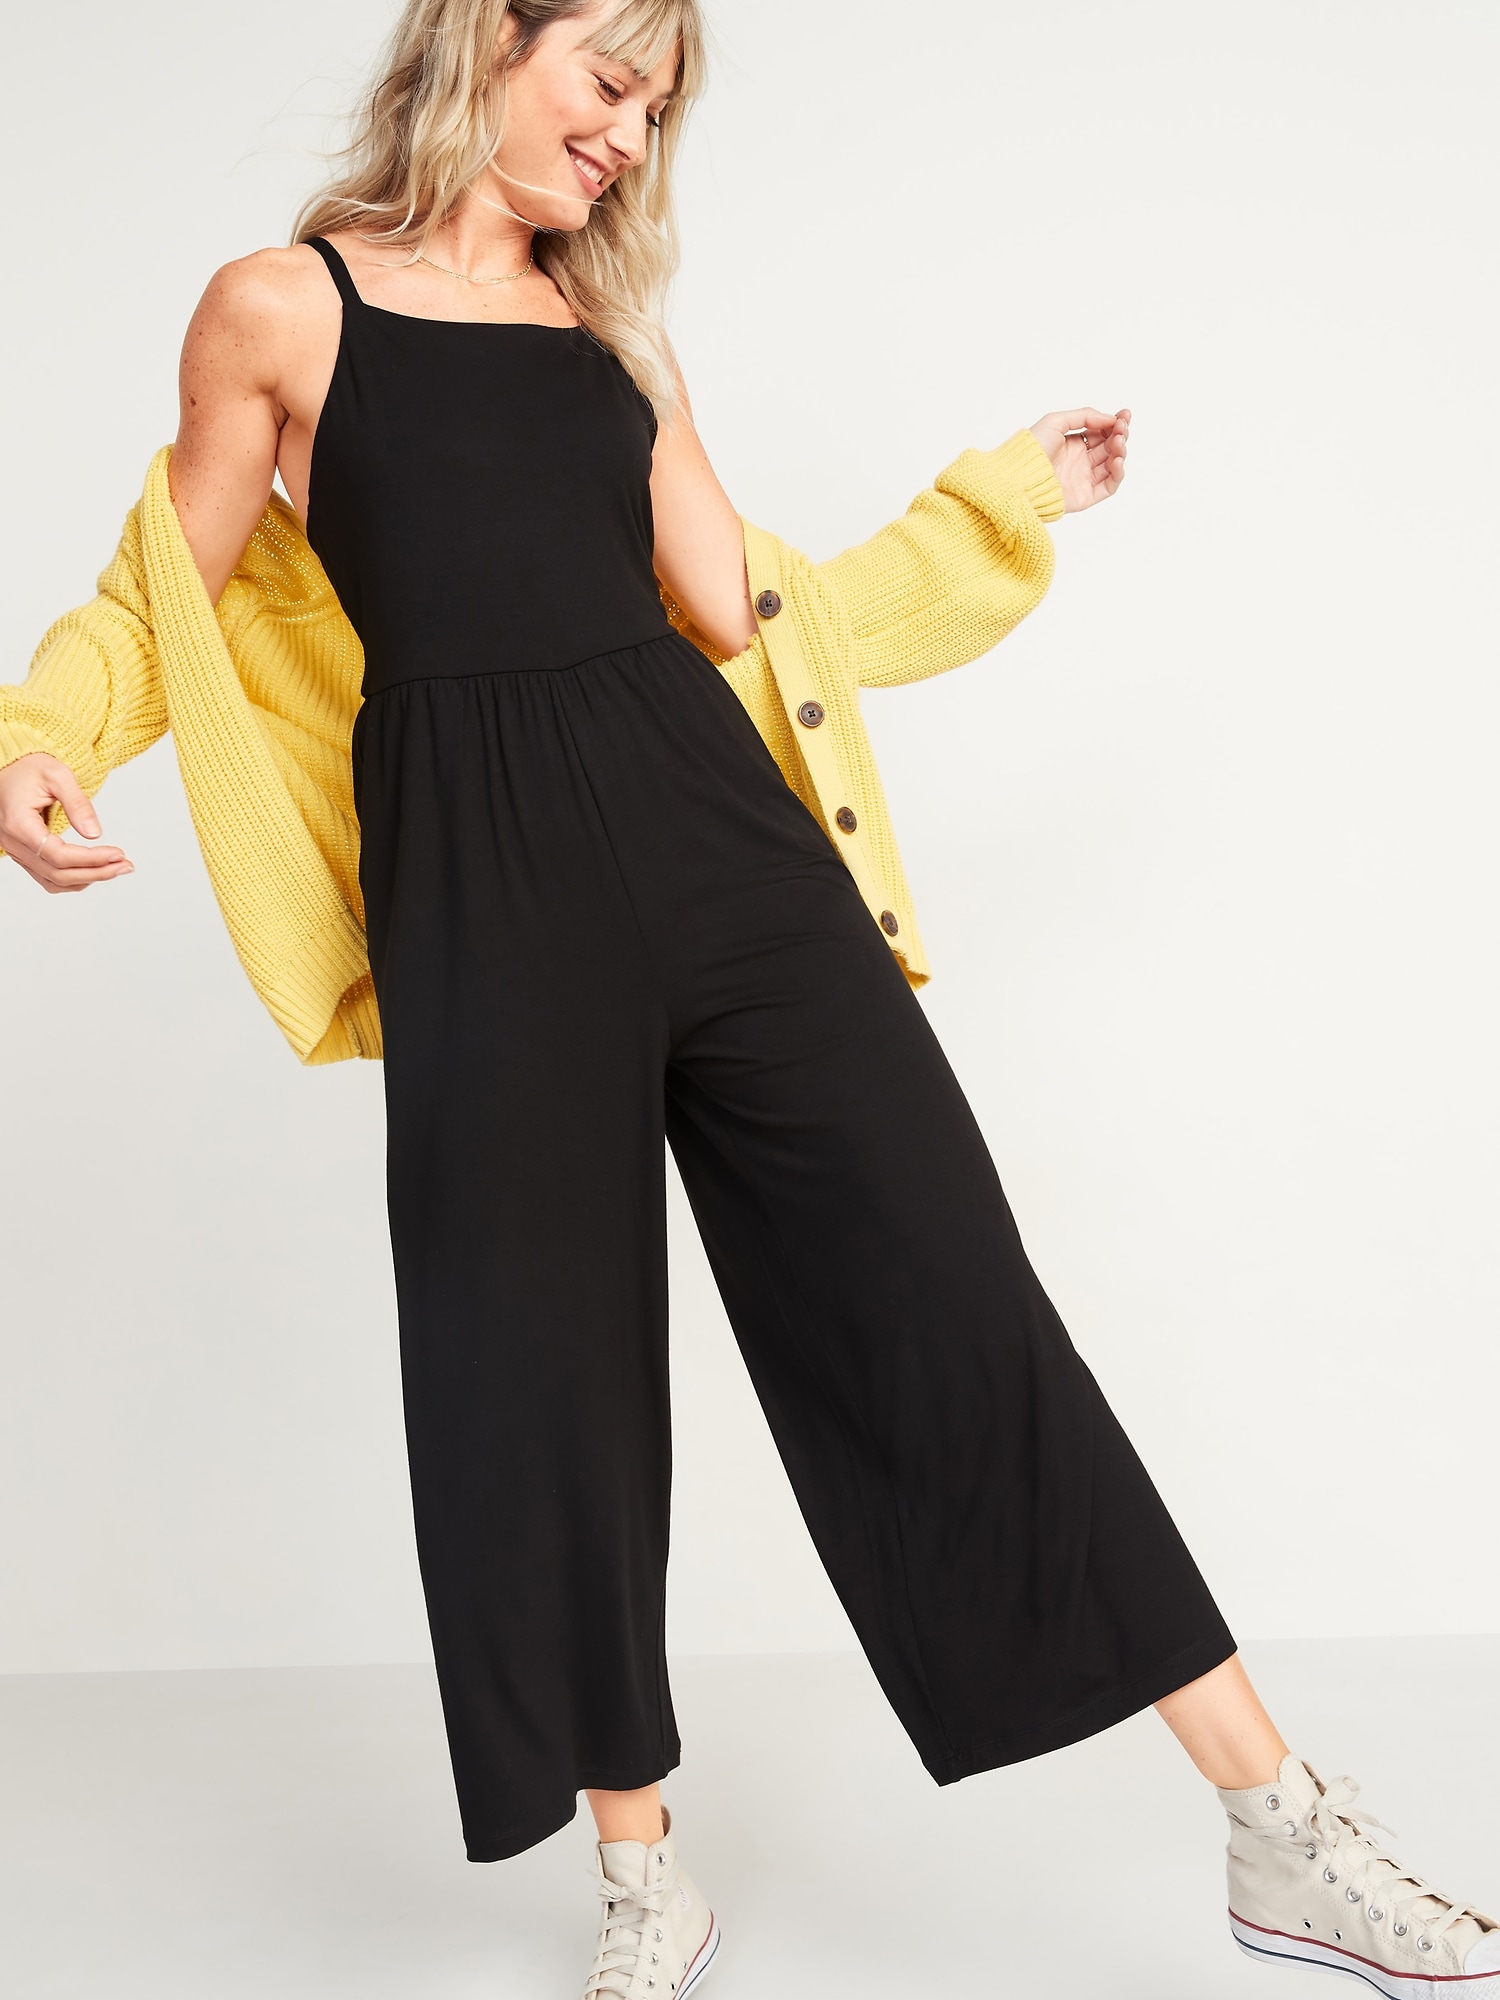 Sleeveless Jersey-Knit Cami Jumpsuit for Women | Old Navy